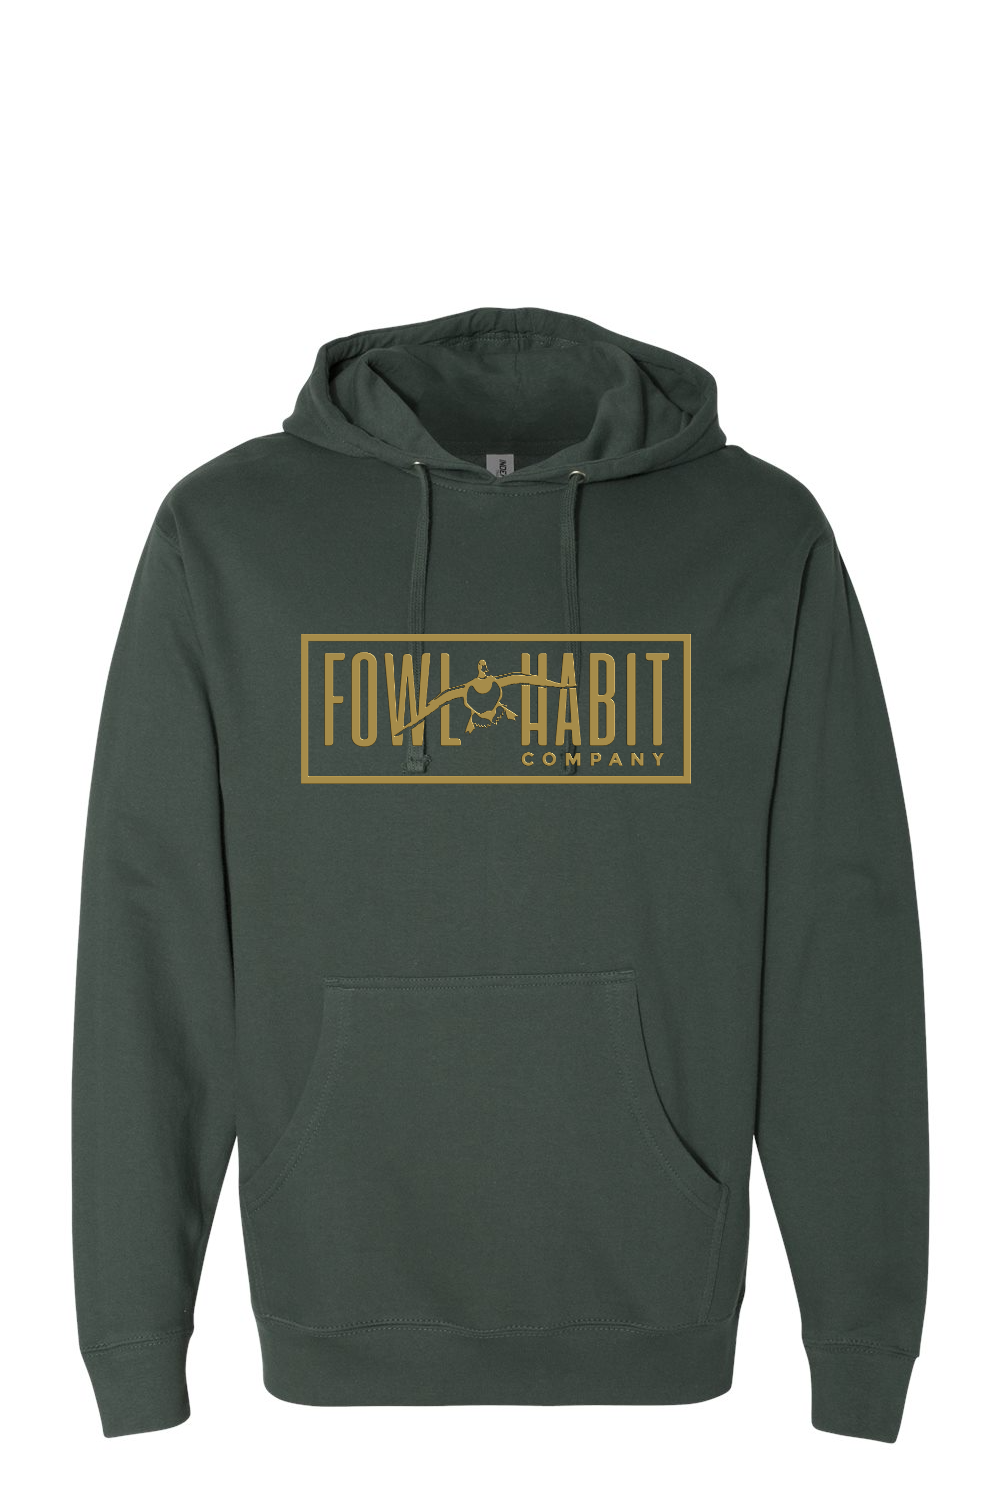 Cupped Up Hoodie - Fowl Habit Co.